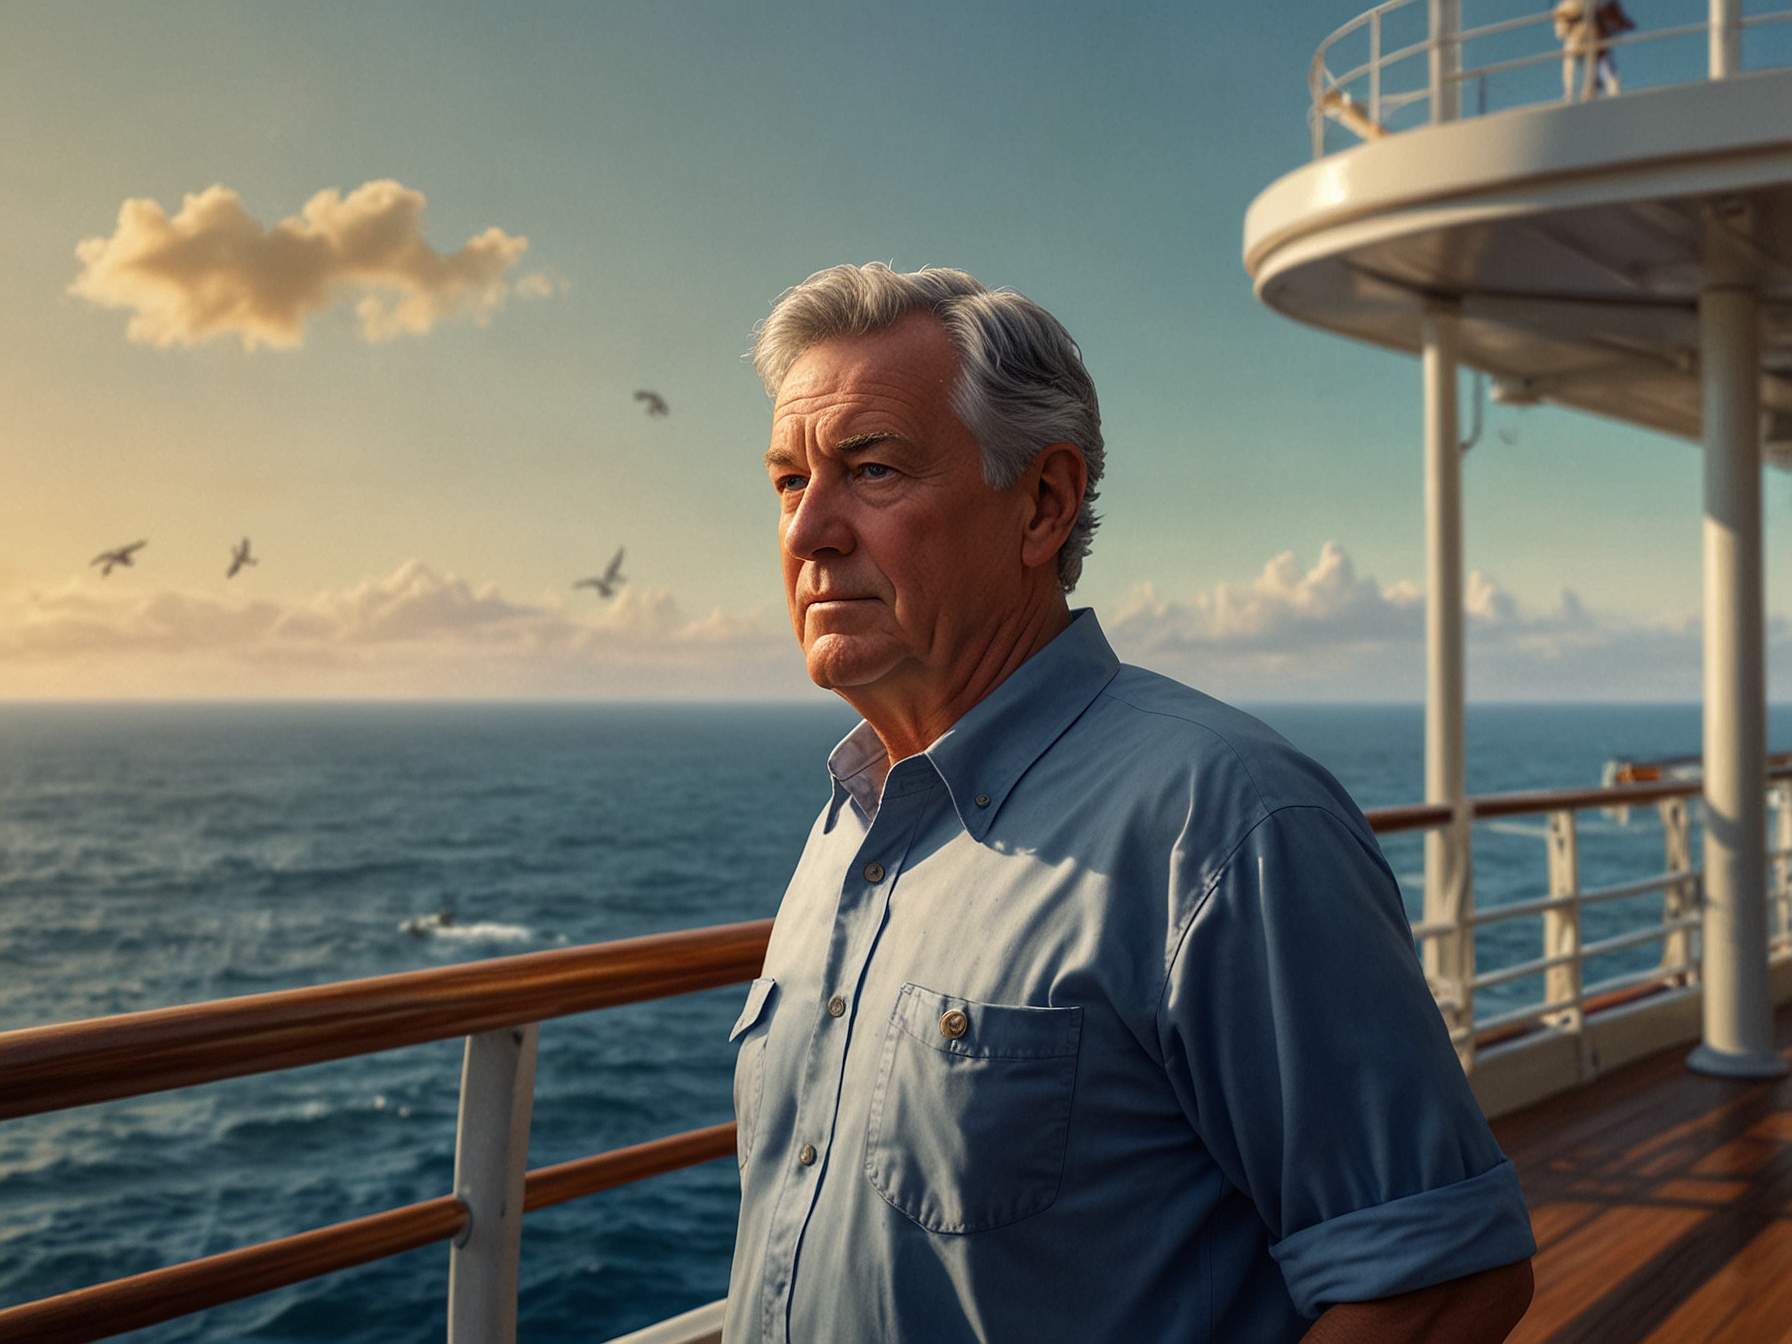 Jack Nolan, the former plumber, stands on the deck of a cruise ship, gazing at an exotic coastline, symbolizing his adventurous new life and financial freedom from his career change.